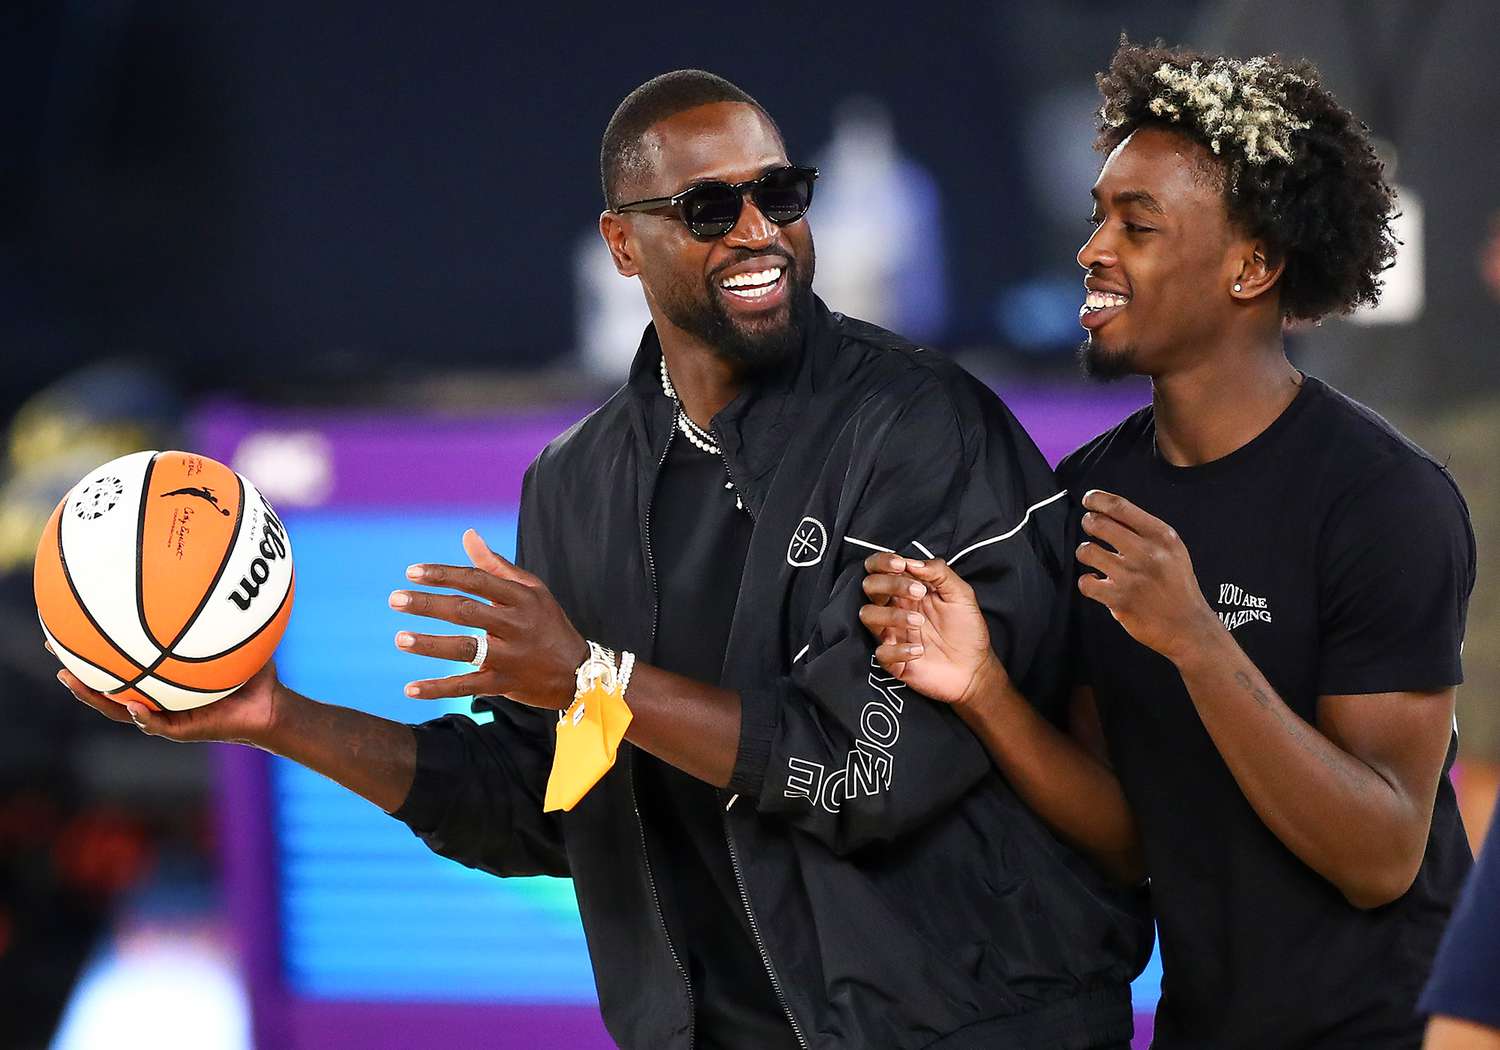 Dwyane Wade and his son Zaire Wade spend time on the court after the game between the Los Angeles Sparks and the Las Vegas Aces at Los Angeles Convention Center on June 30, 2021 in Los Angeles, California